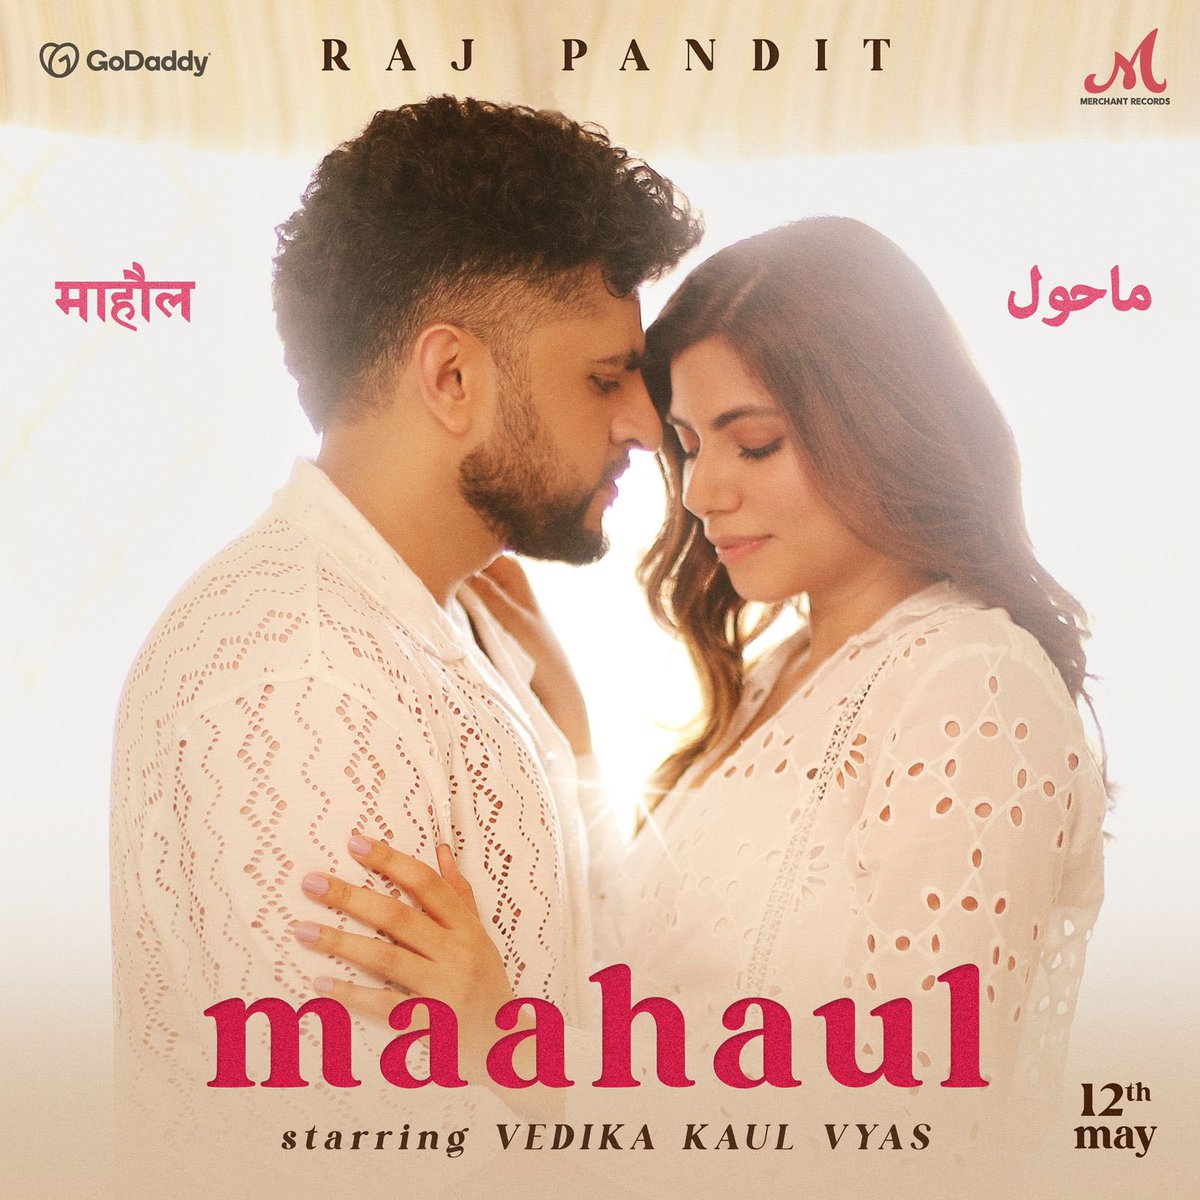 ROHIT SHETTY LAUNCHES RAJ PANDIT’S NEW SINGLE… Singer-composer #RajPandit’s new single #Maahaul was launched by #RohitShetty at an event in #Mumbai… #SalimSulaiman also graced the occasion.